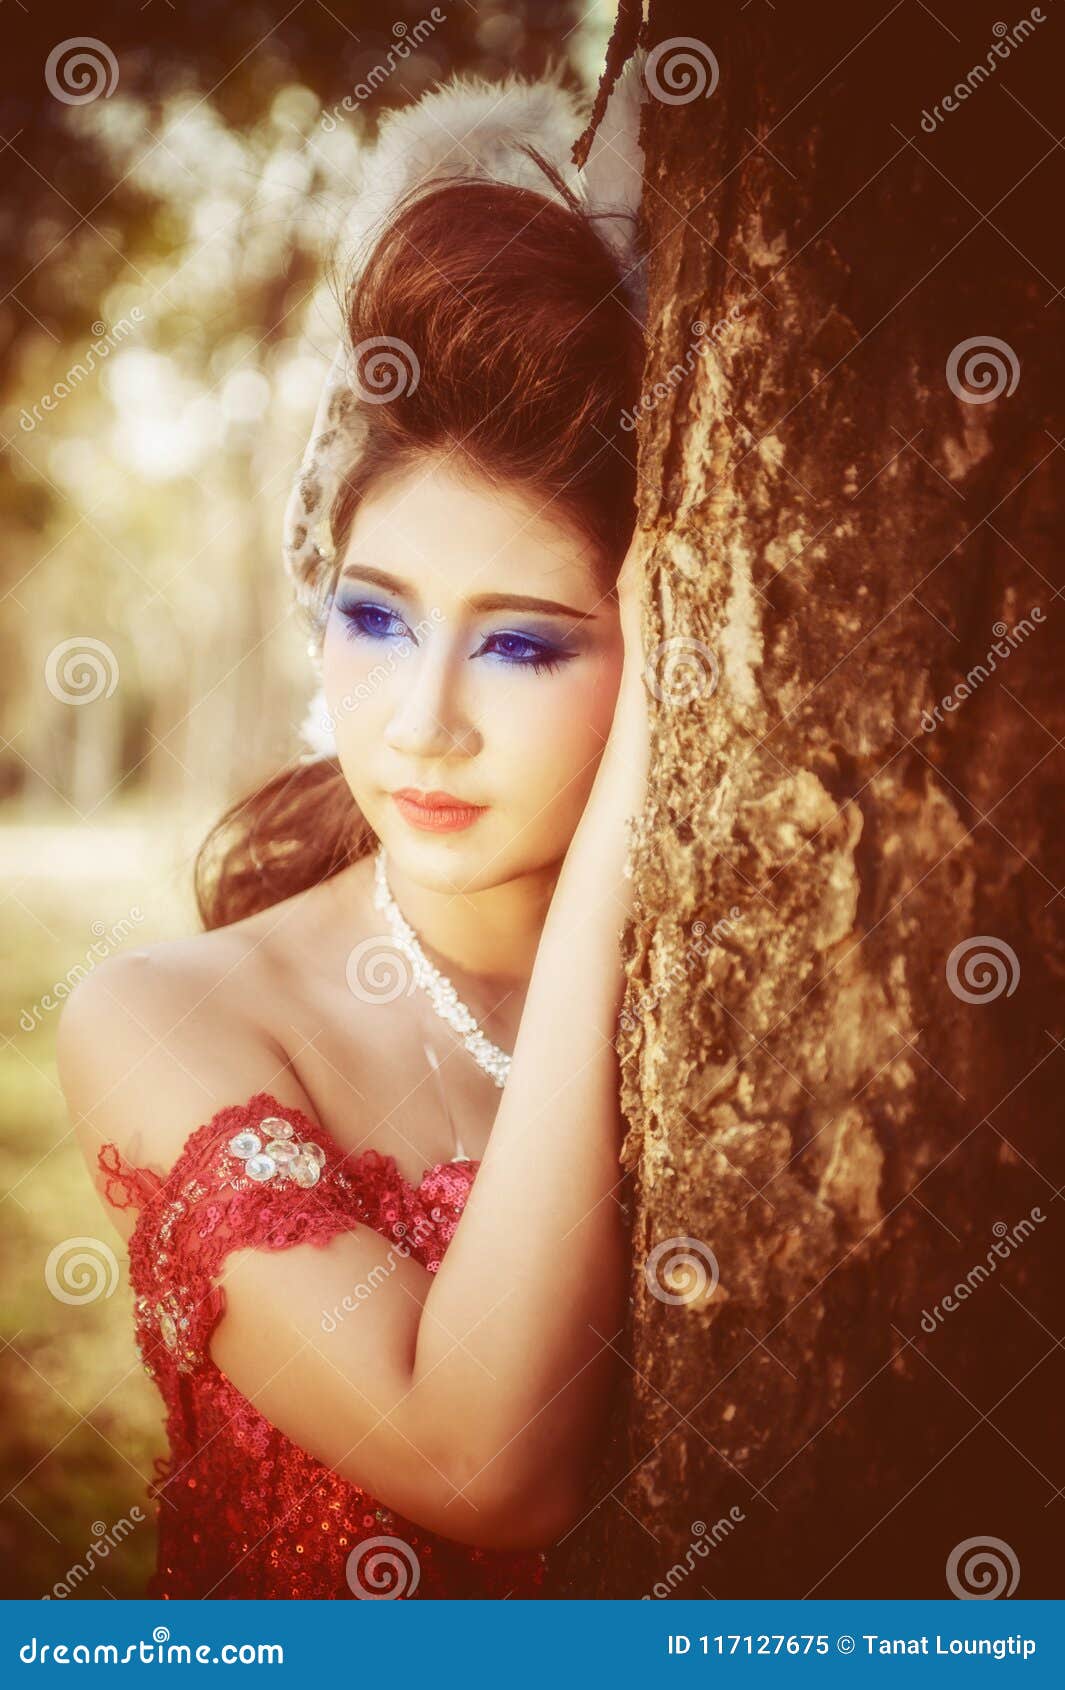 Portrait Of Young Beautiful Woman In Red Dress And Makeup 